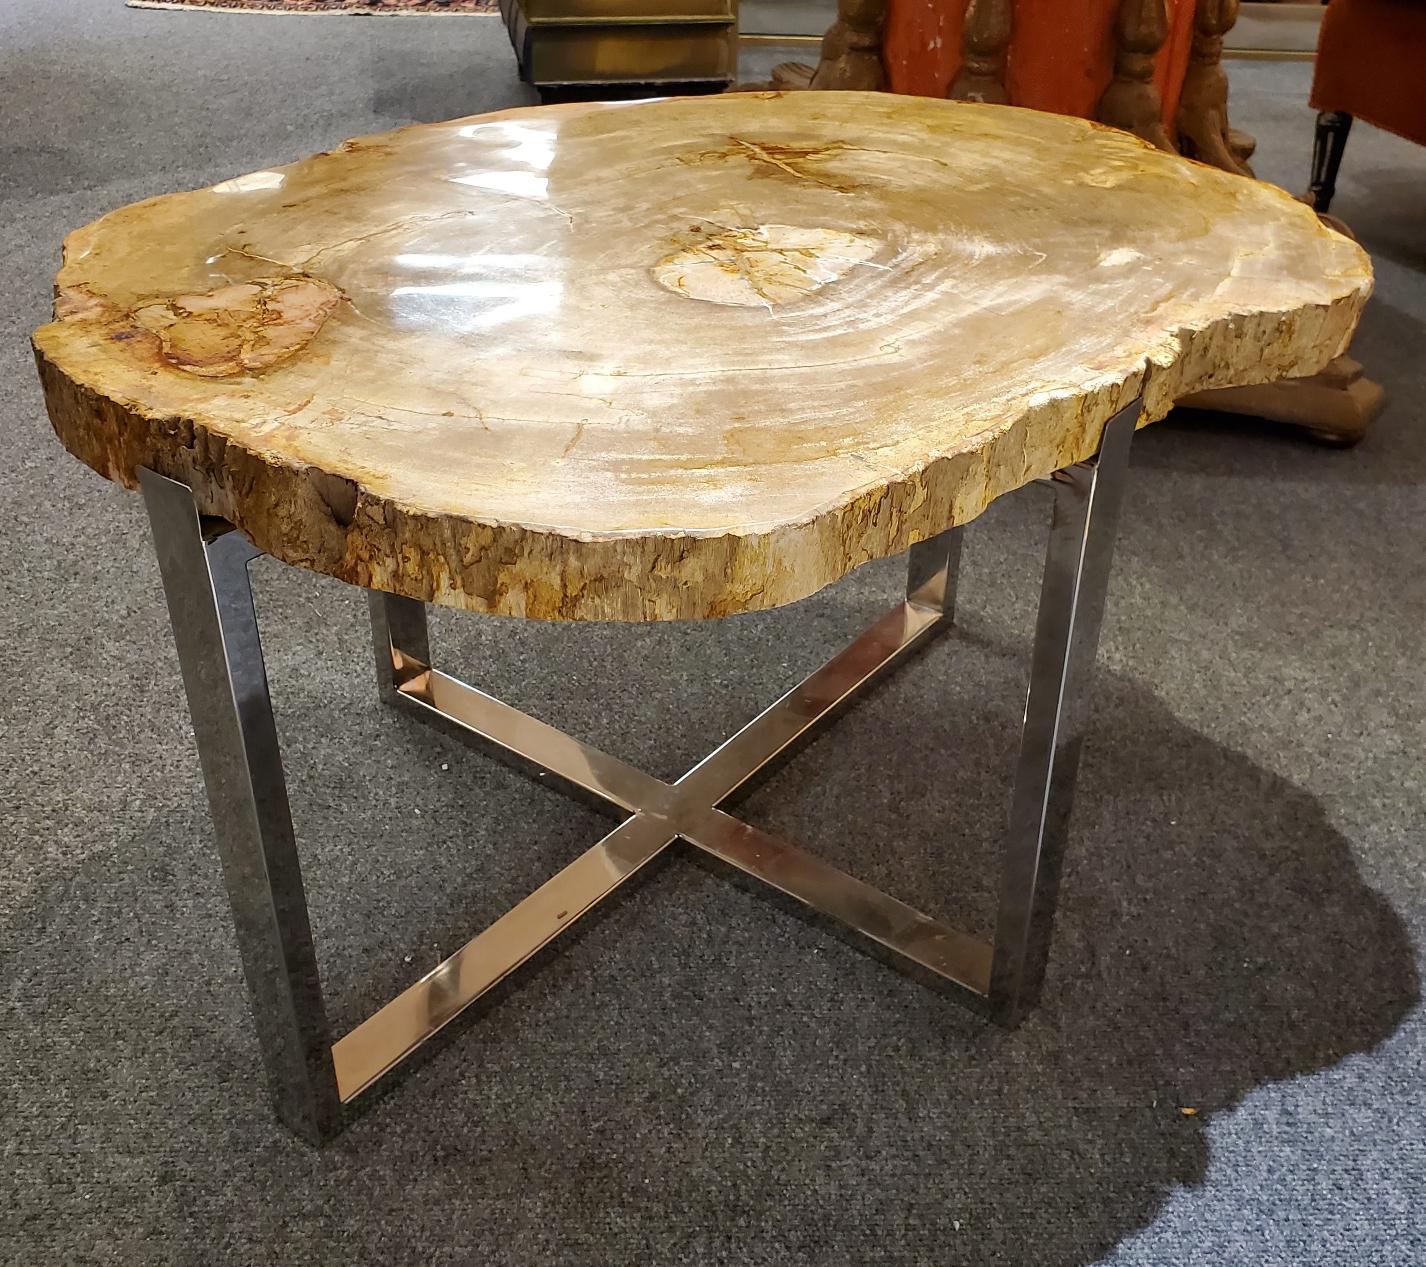 Unusual modern side table with 160 million year old petrified wood top. This table with custom made chrome base is not only functional but it will be a conversation piece in your unique home decor. Could be used as a coffee table in a small space as